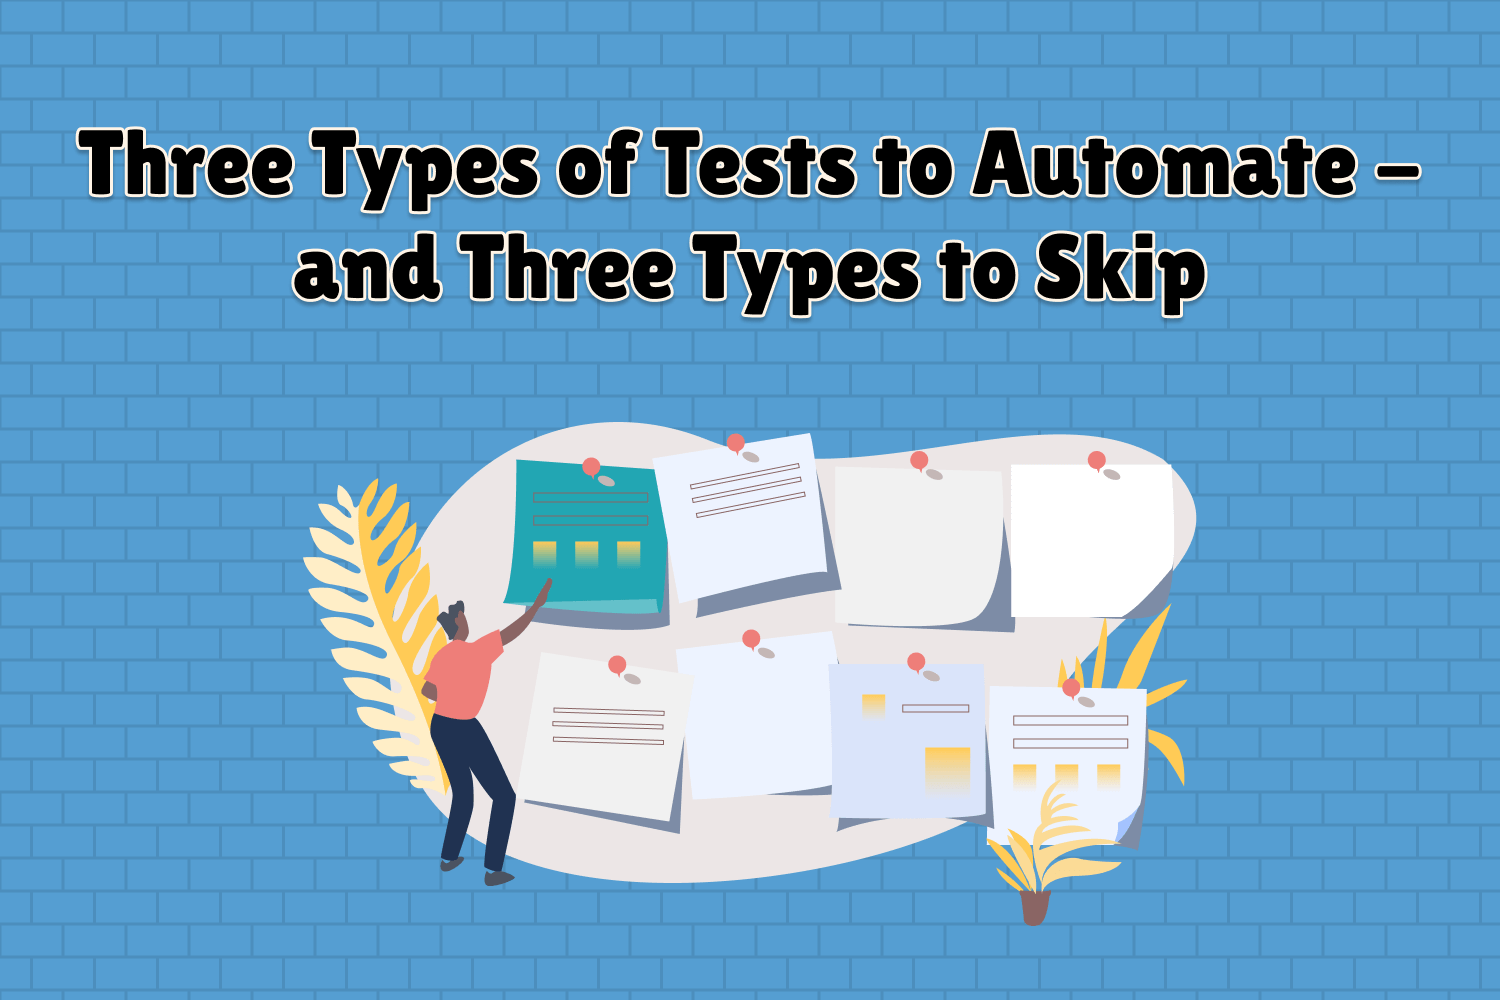 Three Types of Tests to Automate - and Three Types to Skip